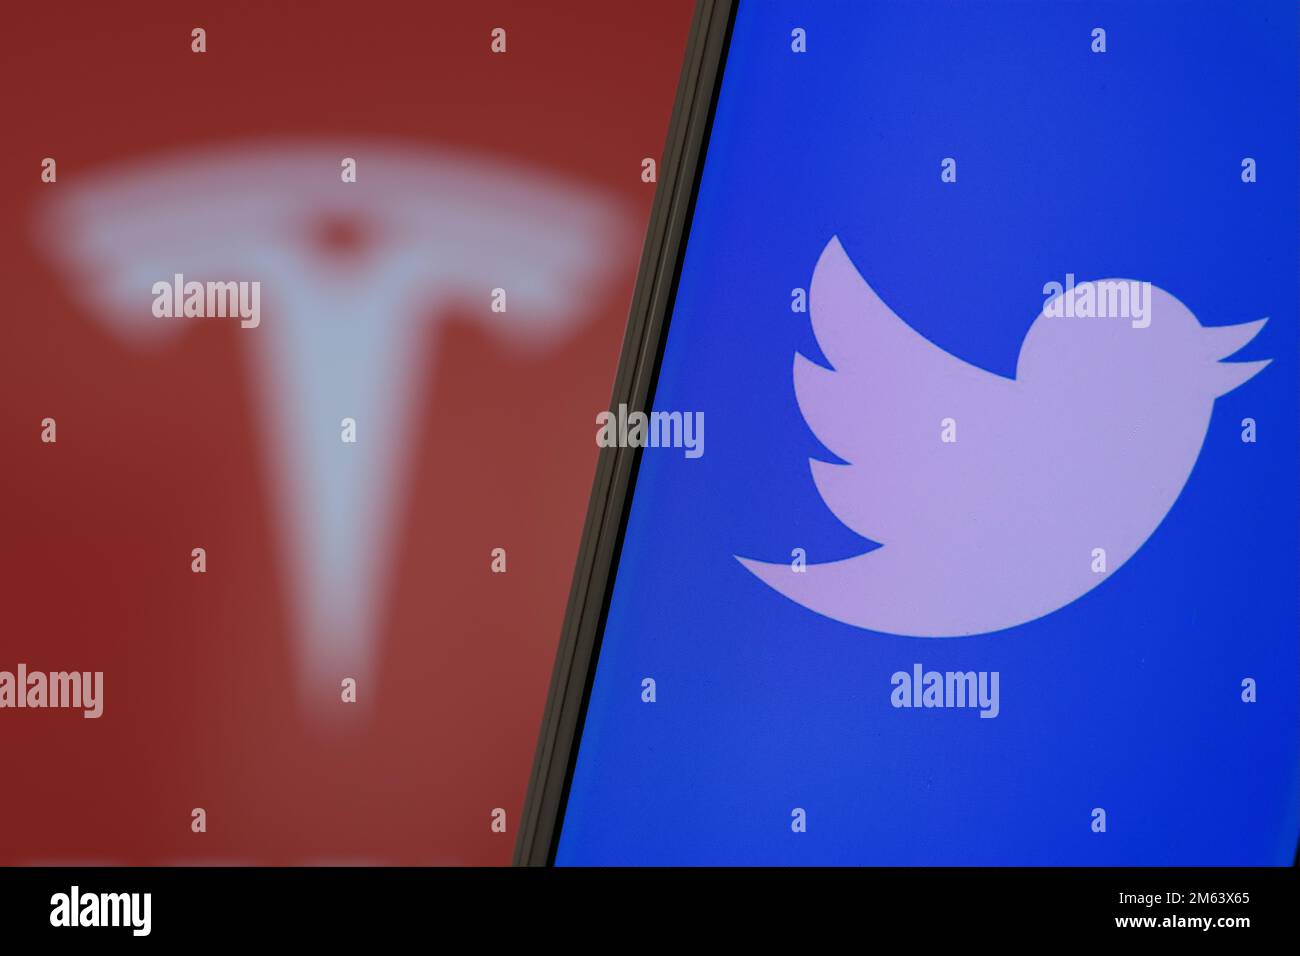 Twitter logo on mobile screen in front of Tesla logo on a backlit screen. Mobile screen is in focus. Stock Photo